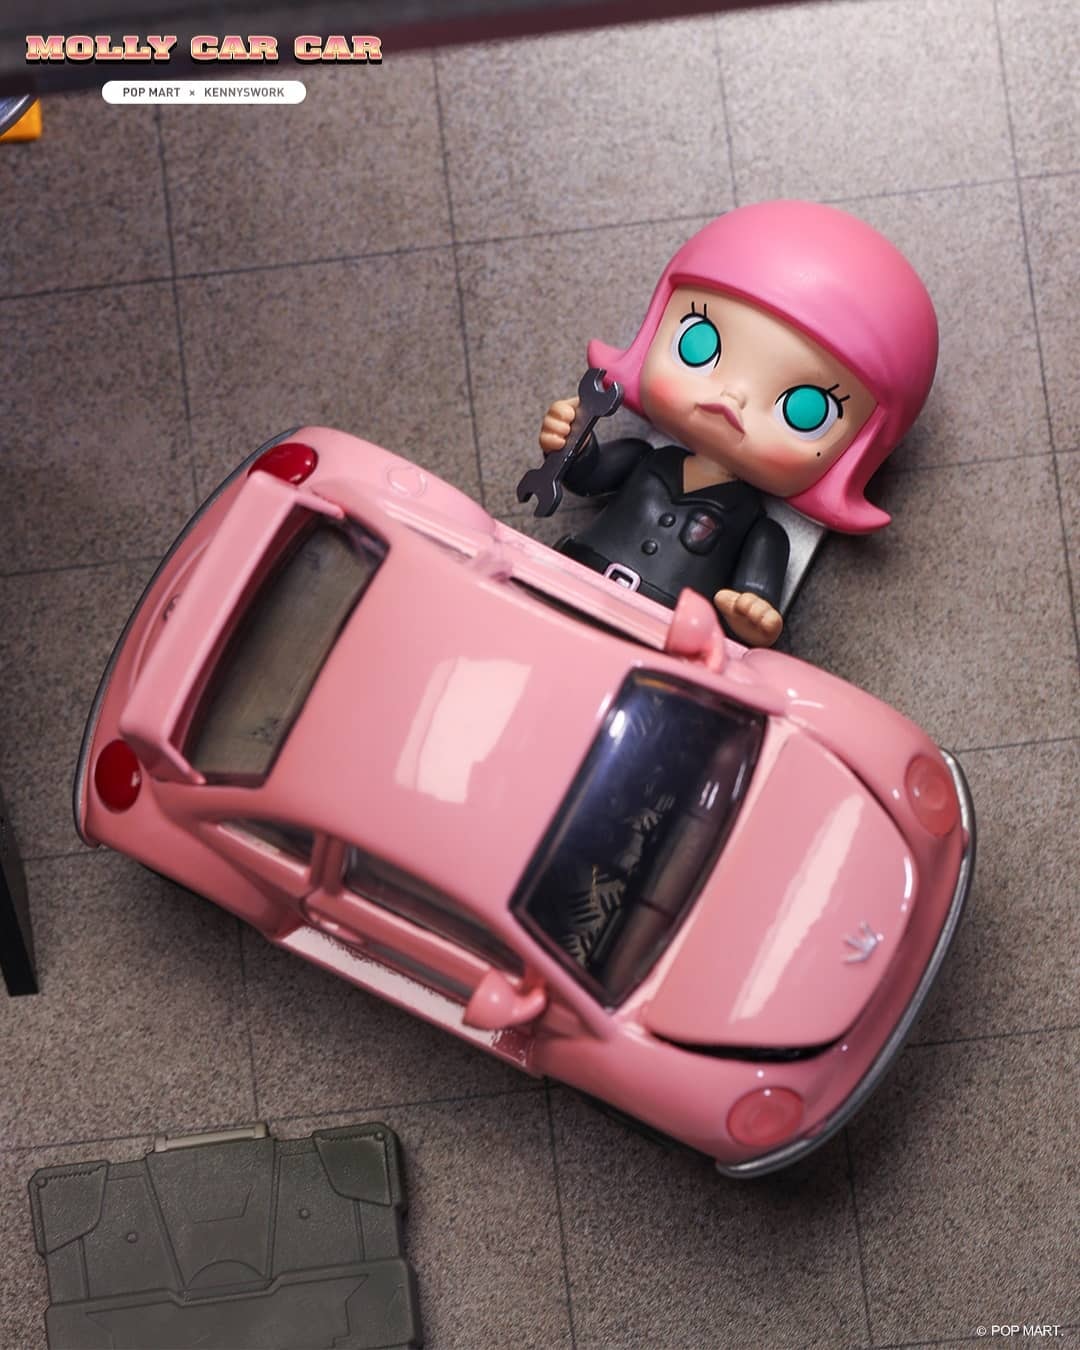 Molly Car Car Blind Box Series toy car with figurine holding a wrench and close-up details.